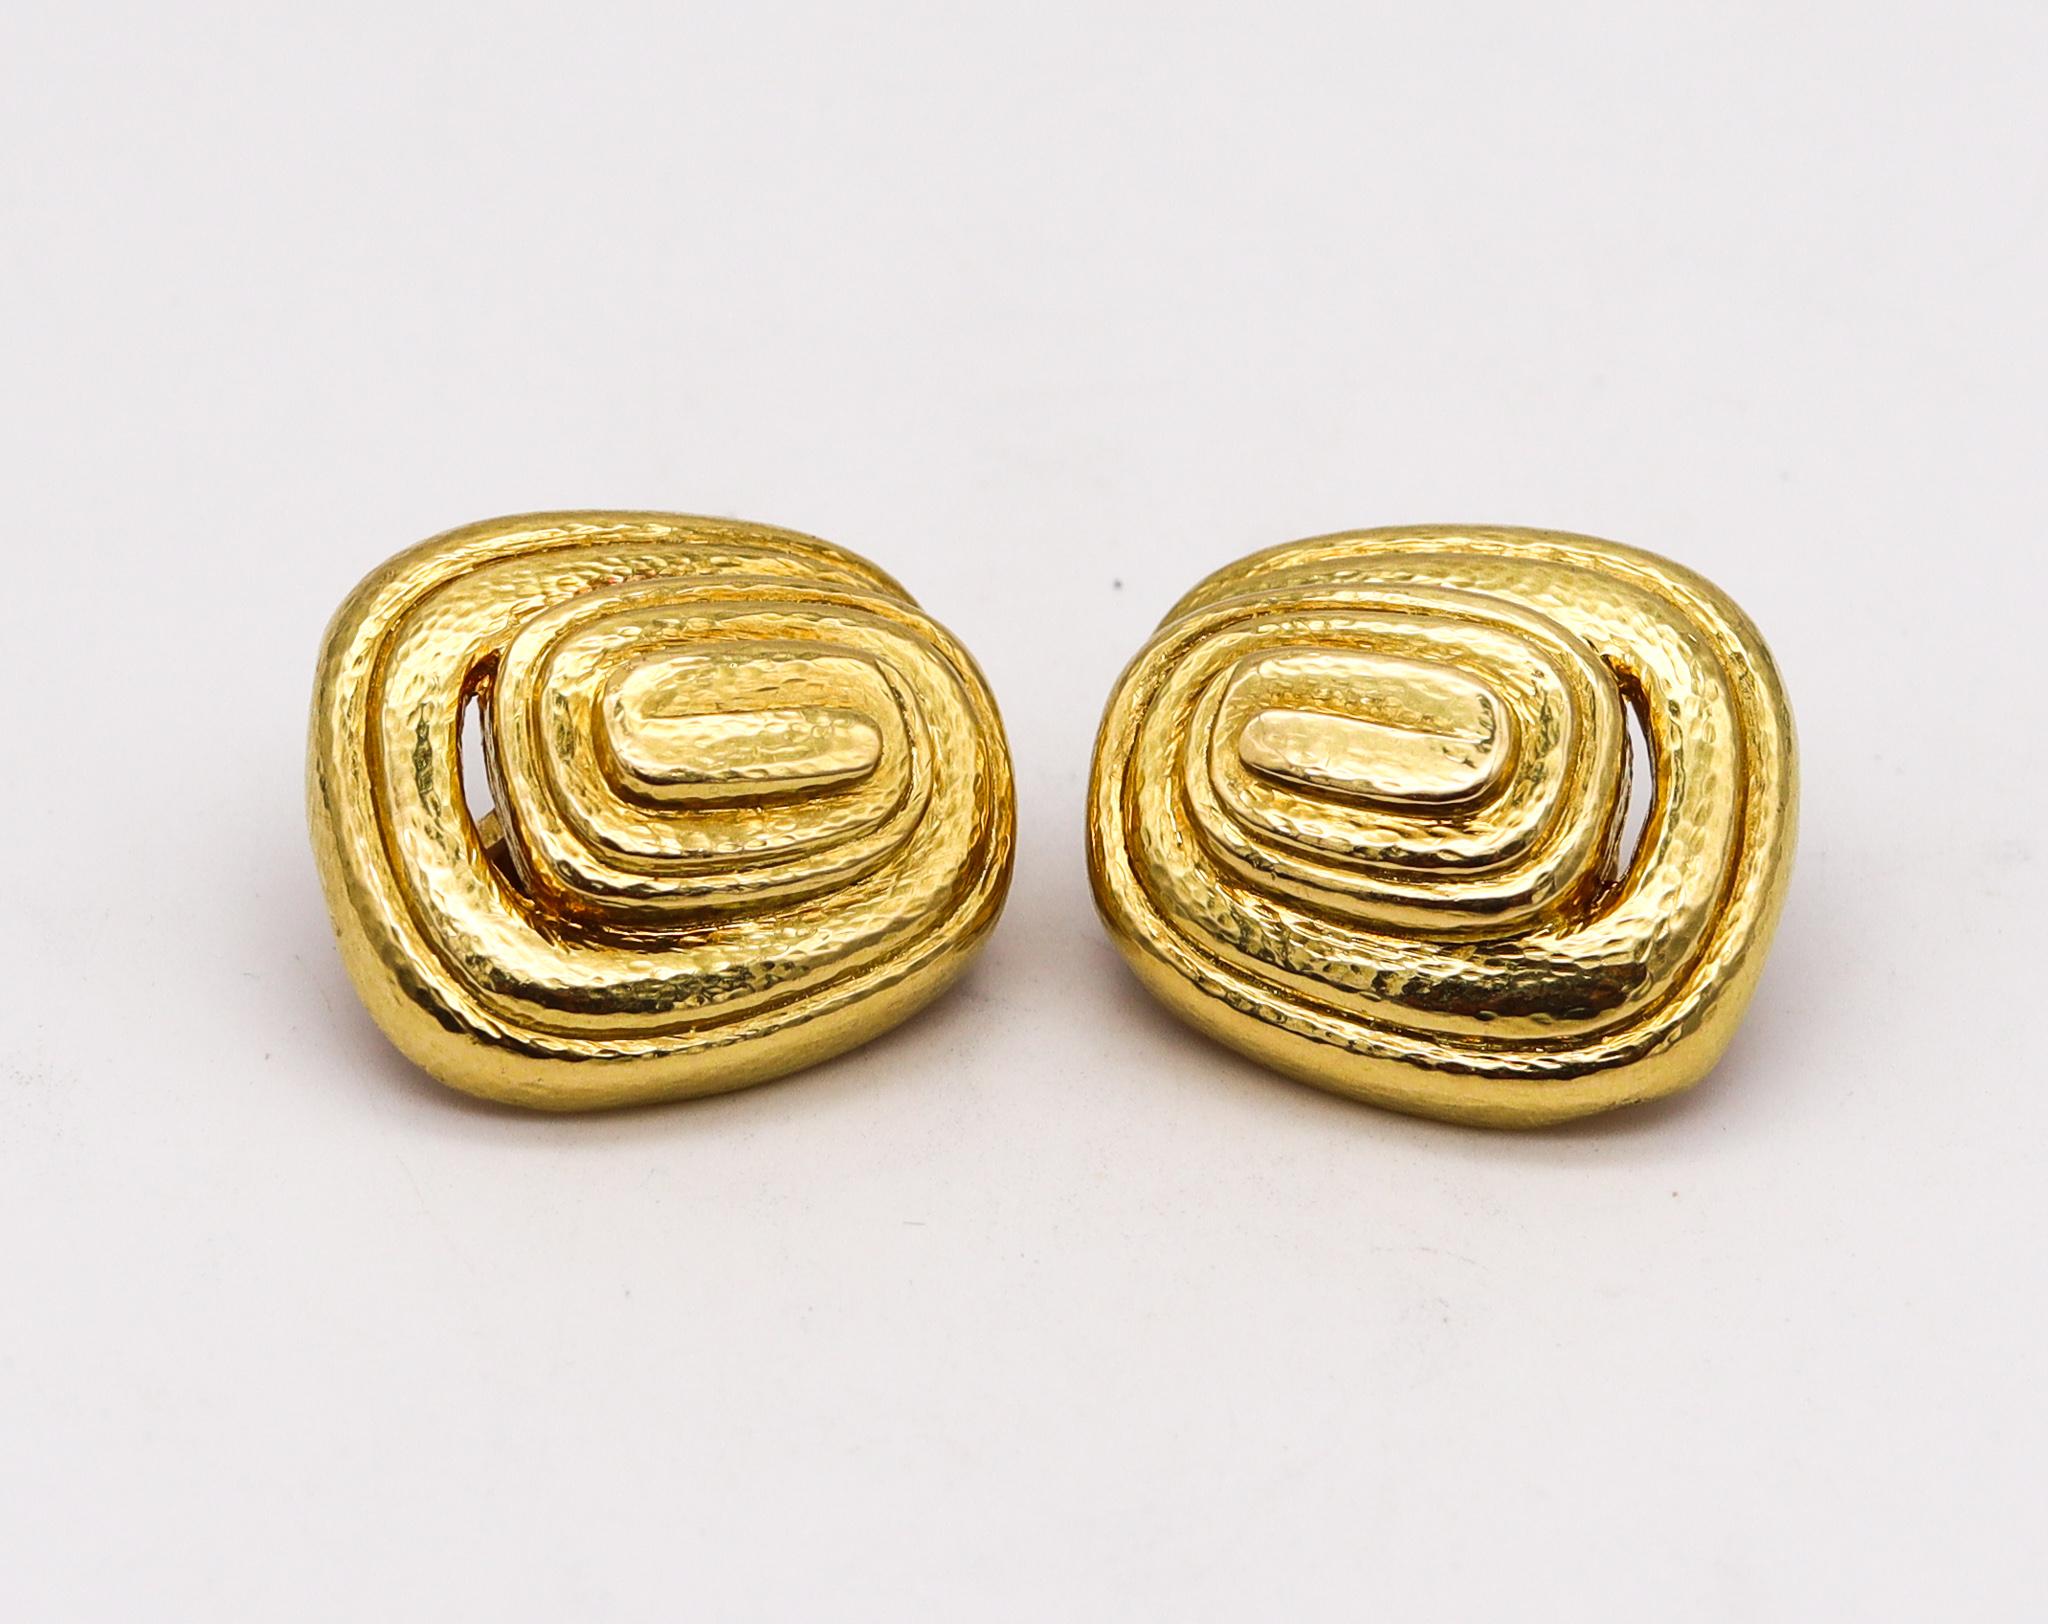 Modernist David Webb 1970 New York Mayan Clips on Earrings in Textured 18kt Yellow Gold For Sale